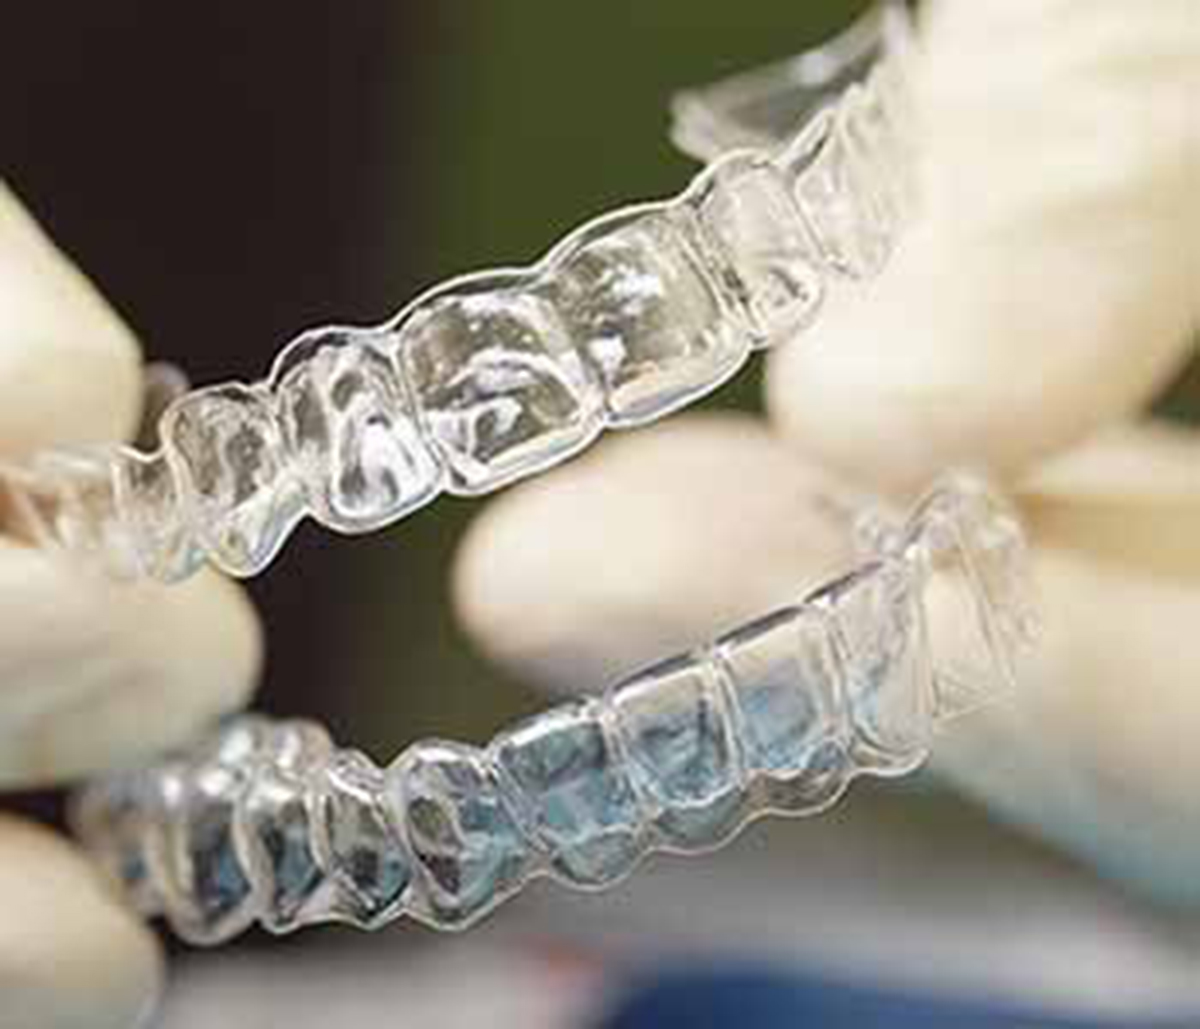 Hamilton, ON, Dr. Karen Ho provides custom mouth guards for patients with teeth grinding habits